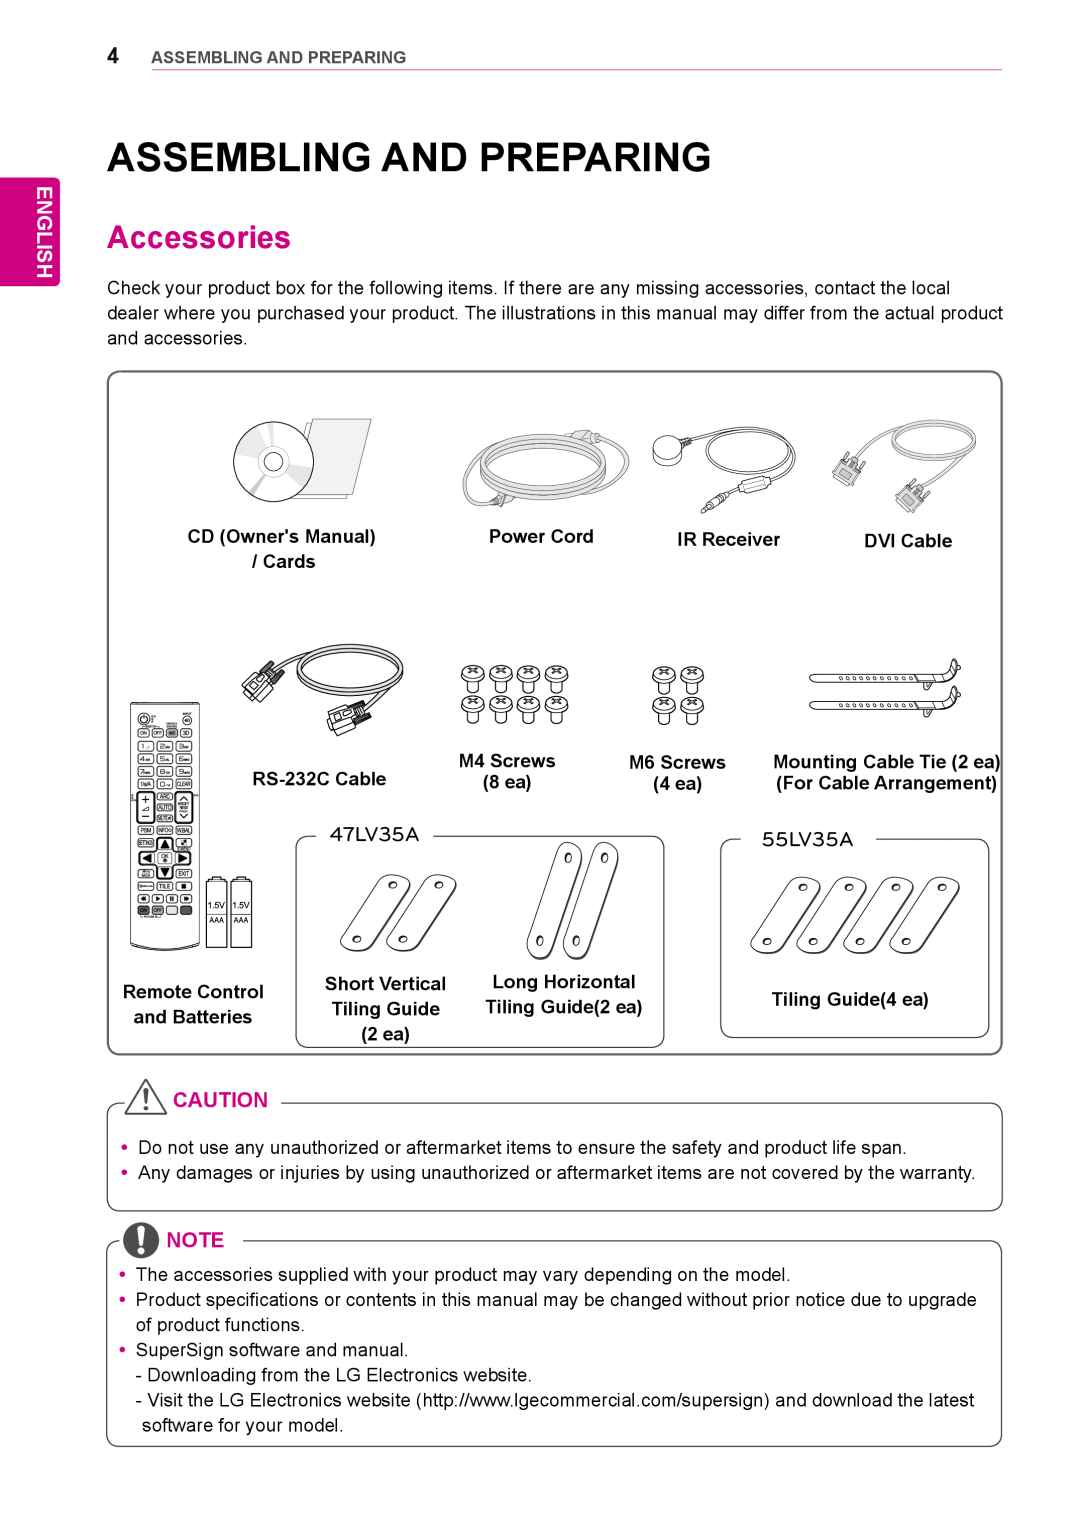 LG Electronics 47LV35A owner manual Assembling And Preparing, Accessories, English, 55LV35A 